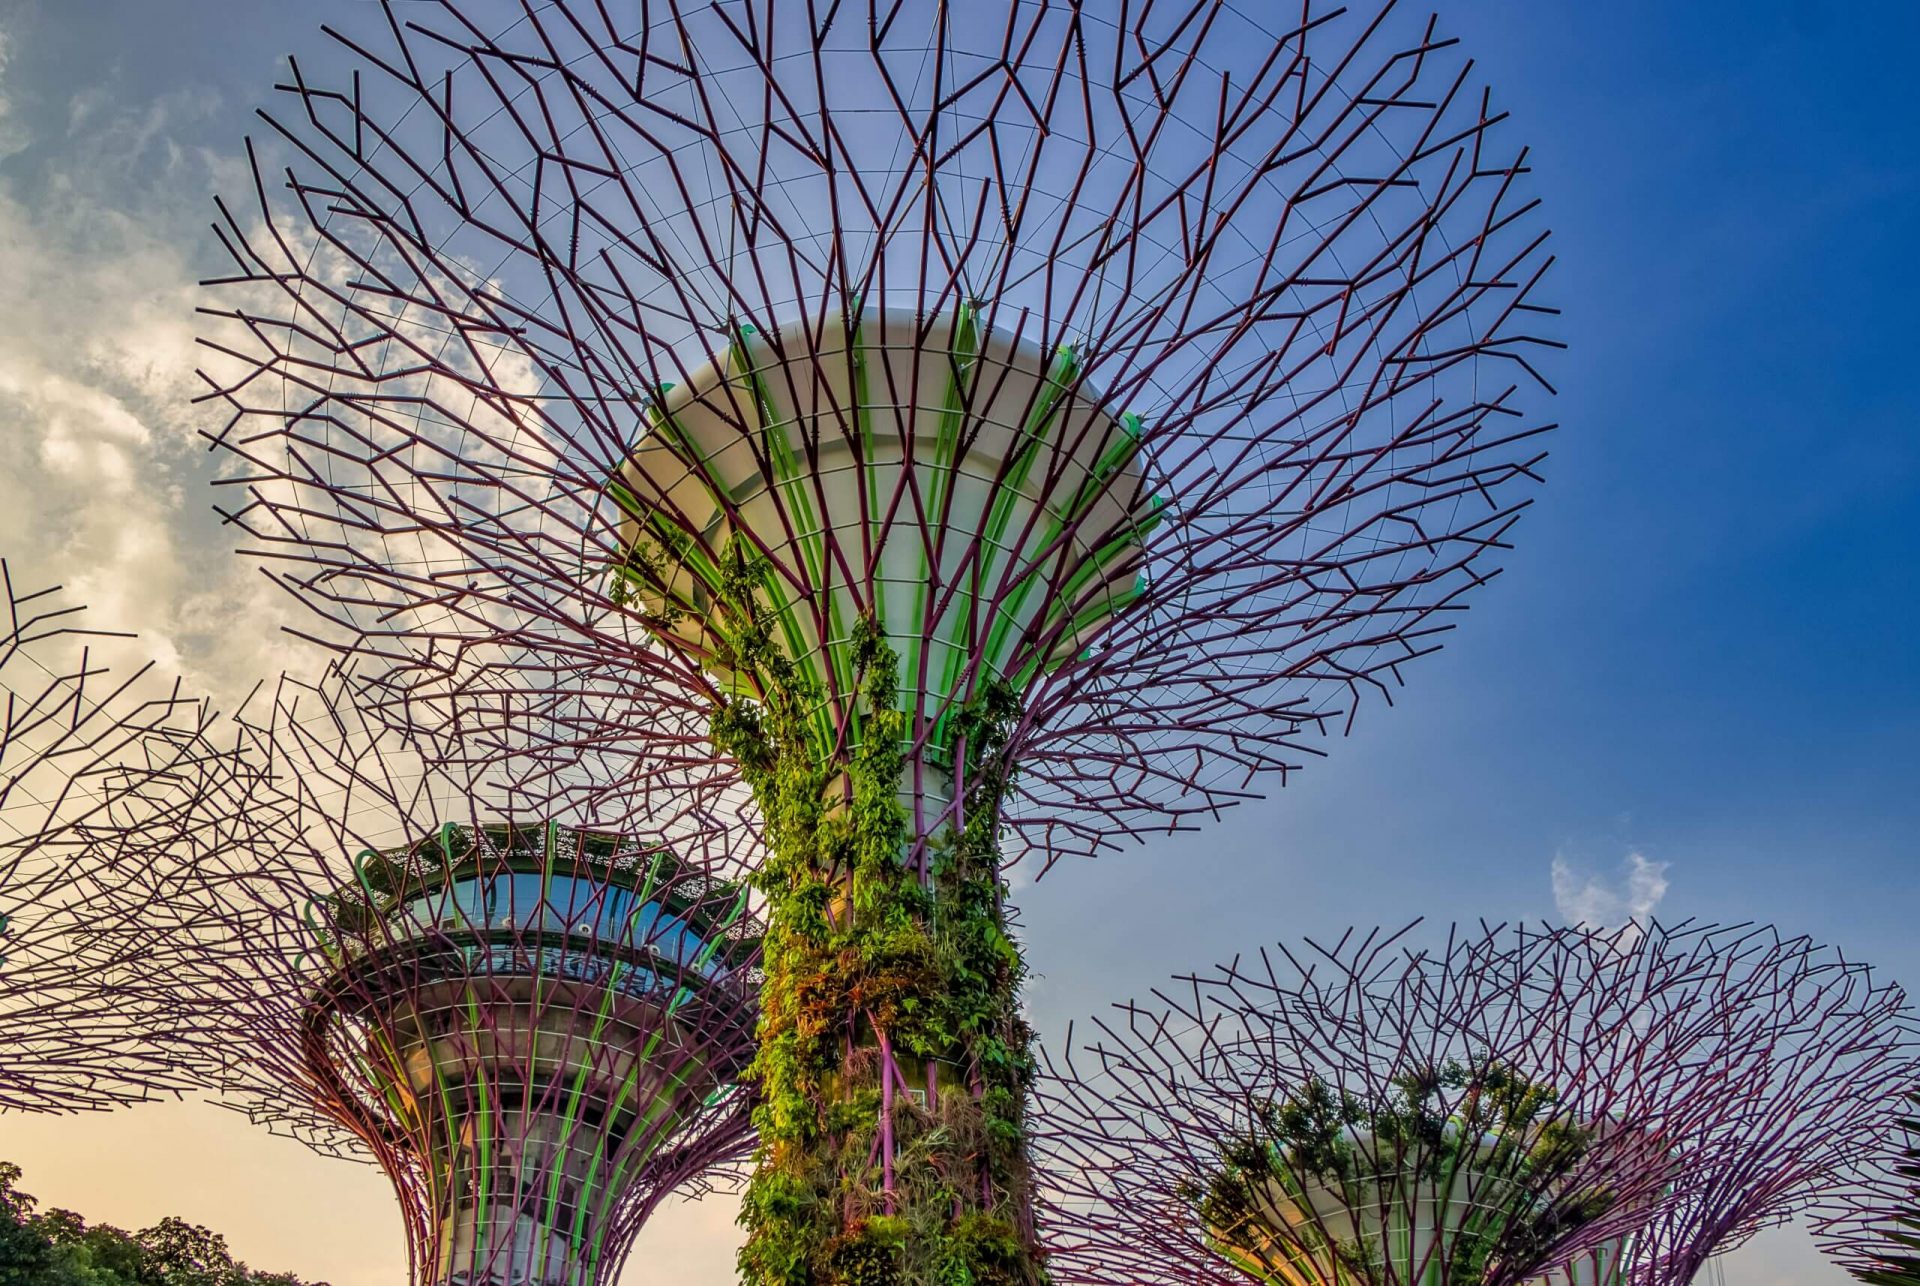 Gardens by the bay under the blue sky